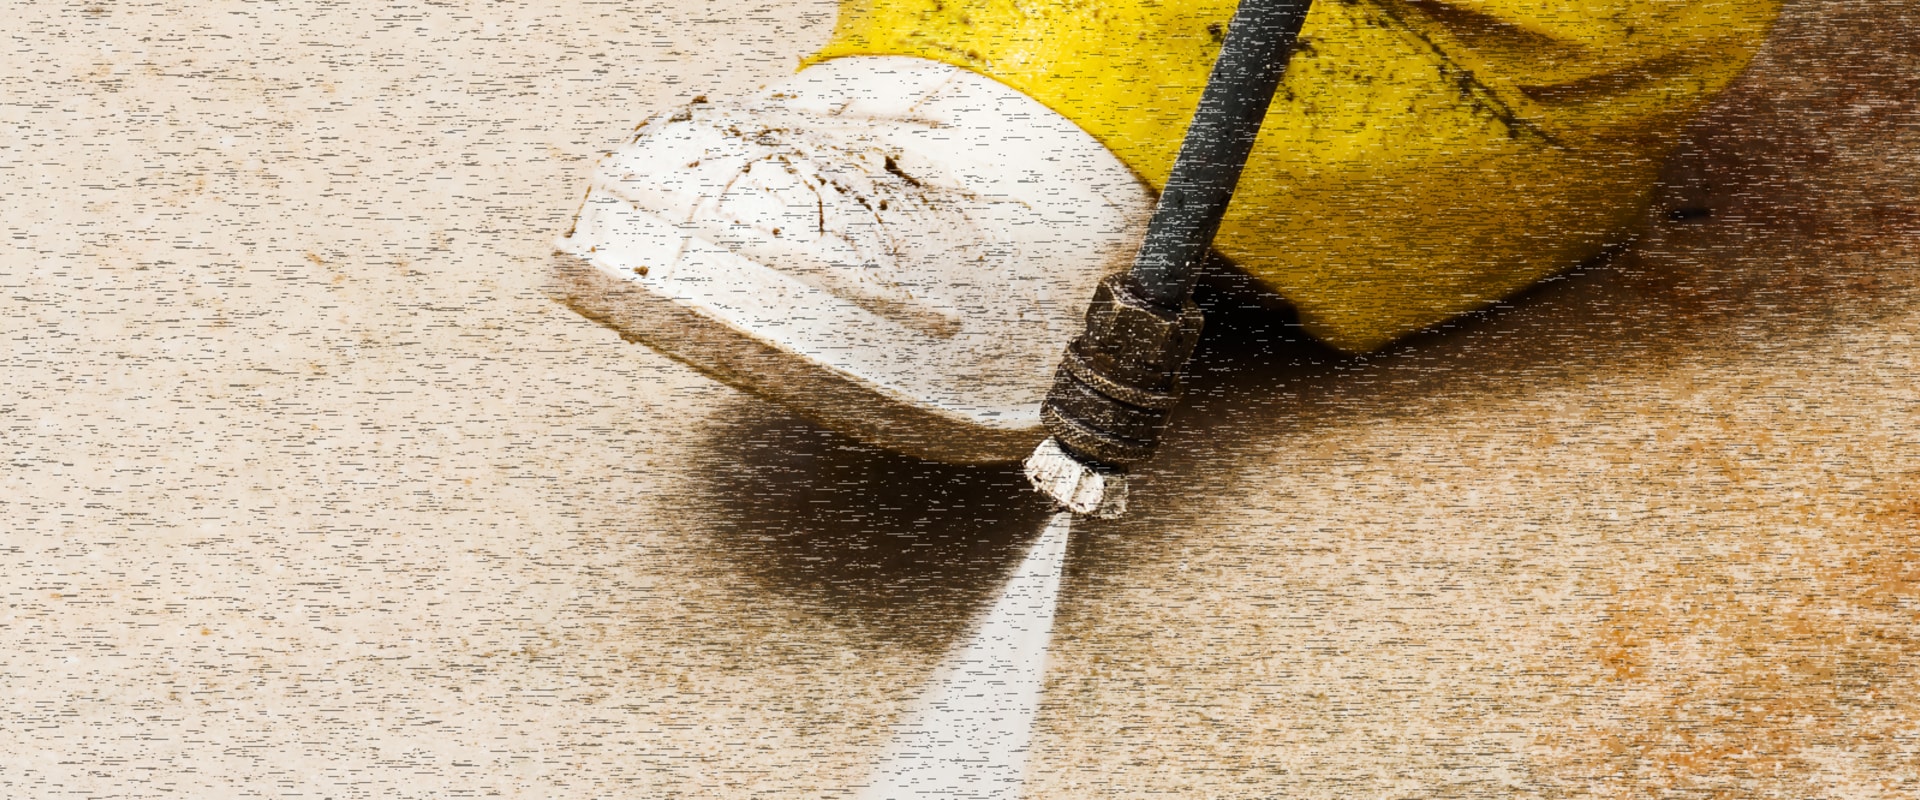 Choosing the Right Pressure for Pressure Washing